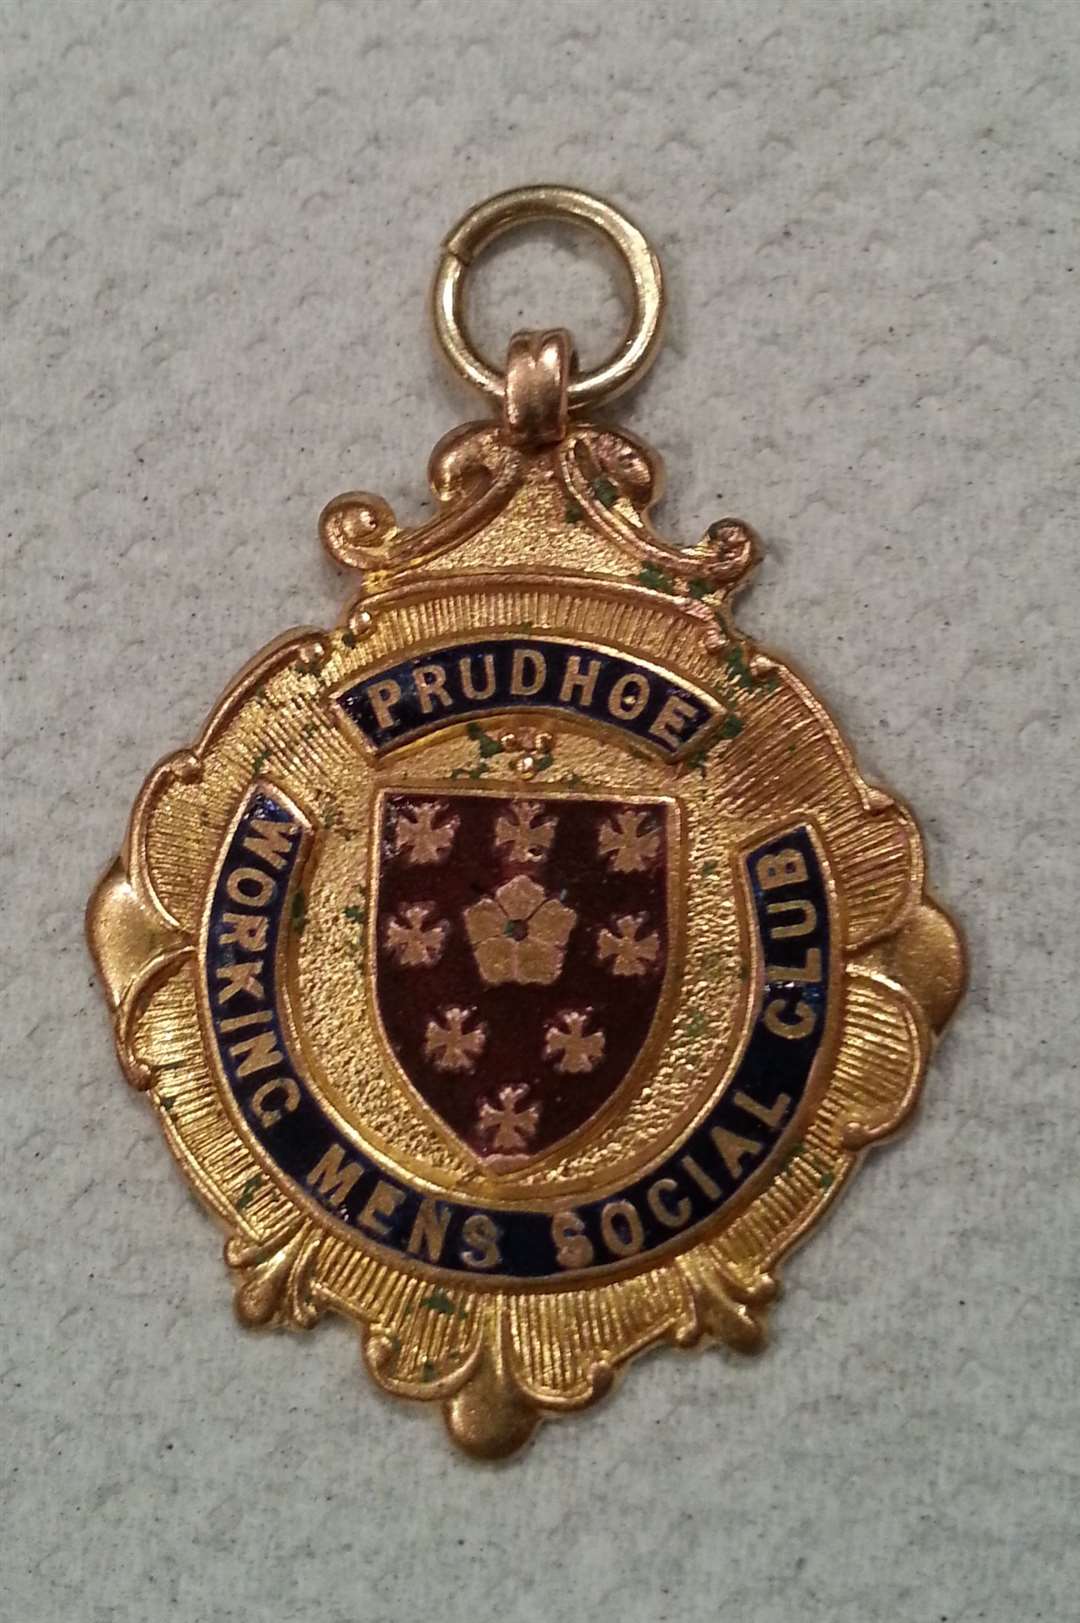 Royal Phoenix Detecting Group discovered this First World War medal